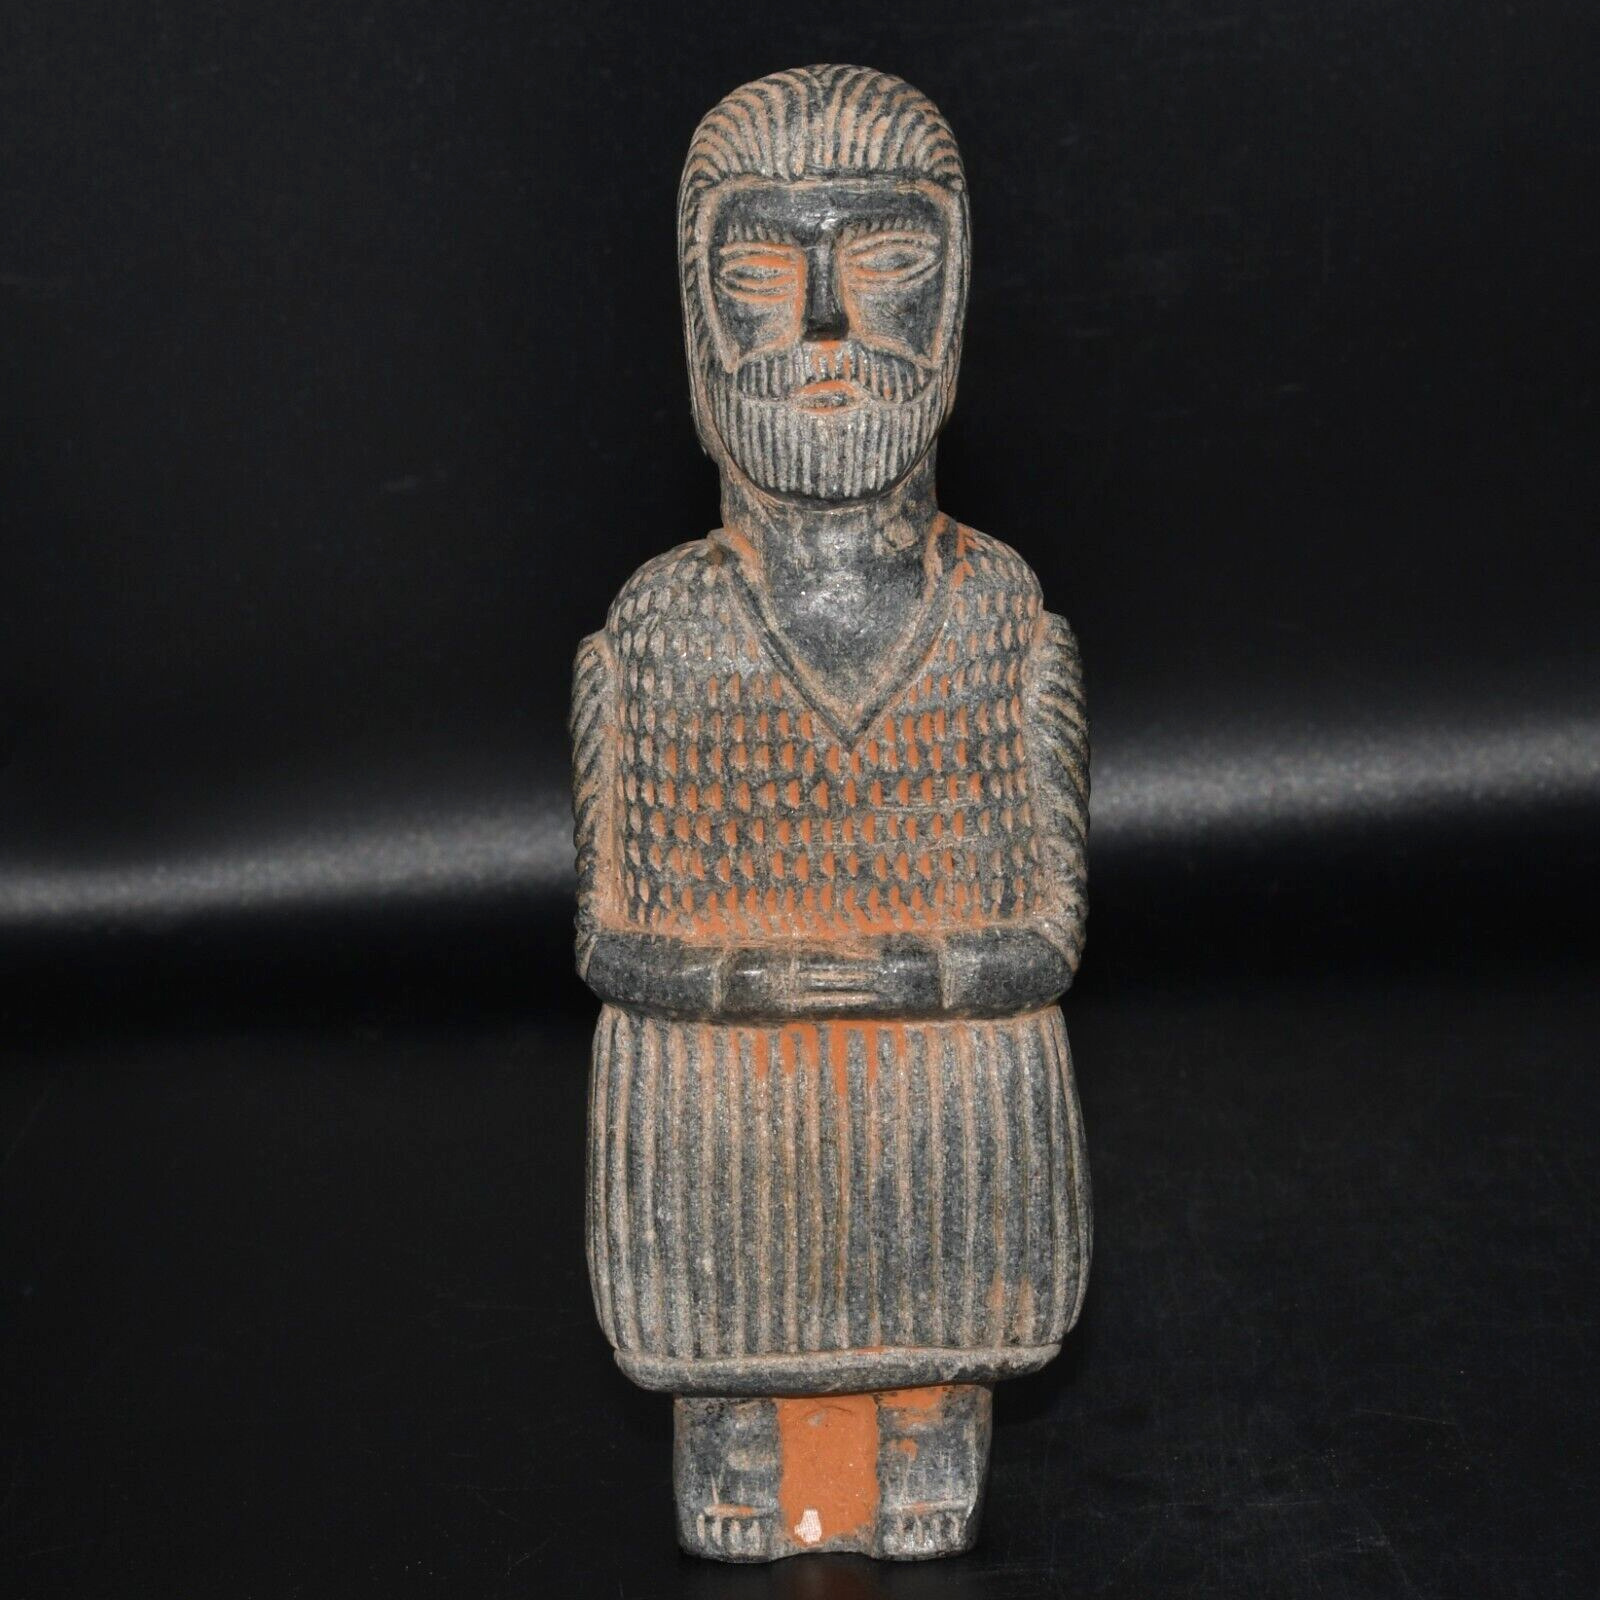 Rare Large Ancient Near Eastern Stone Idol Figurine of Nobleman Standing